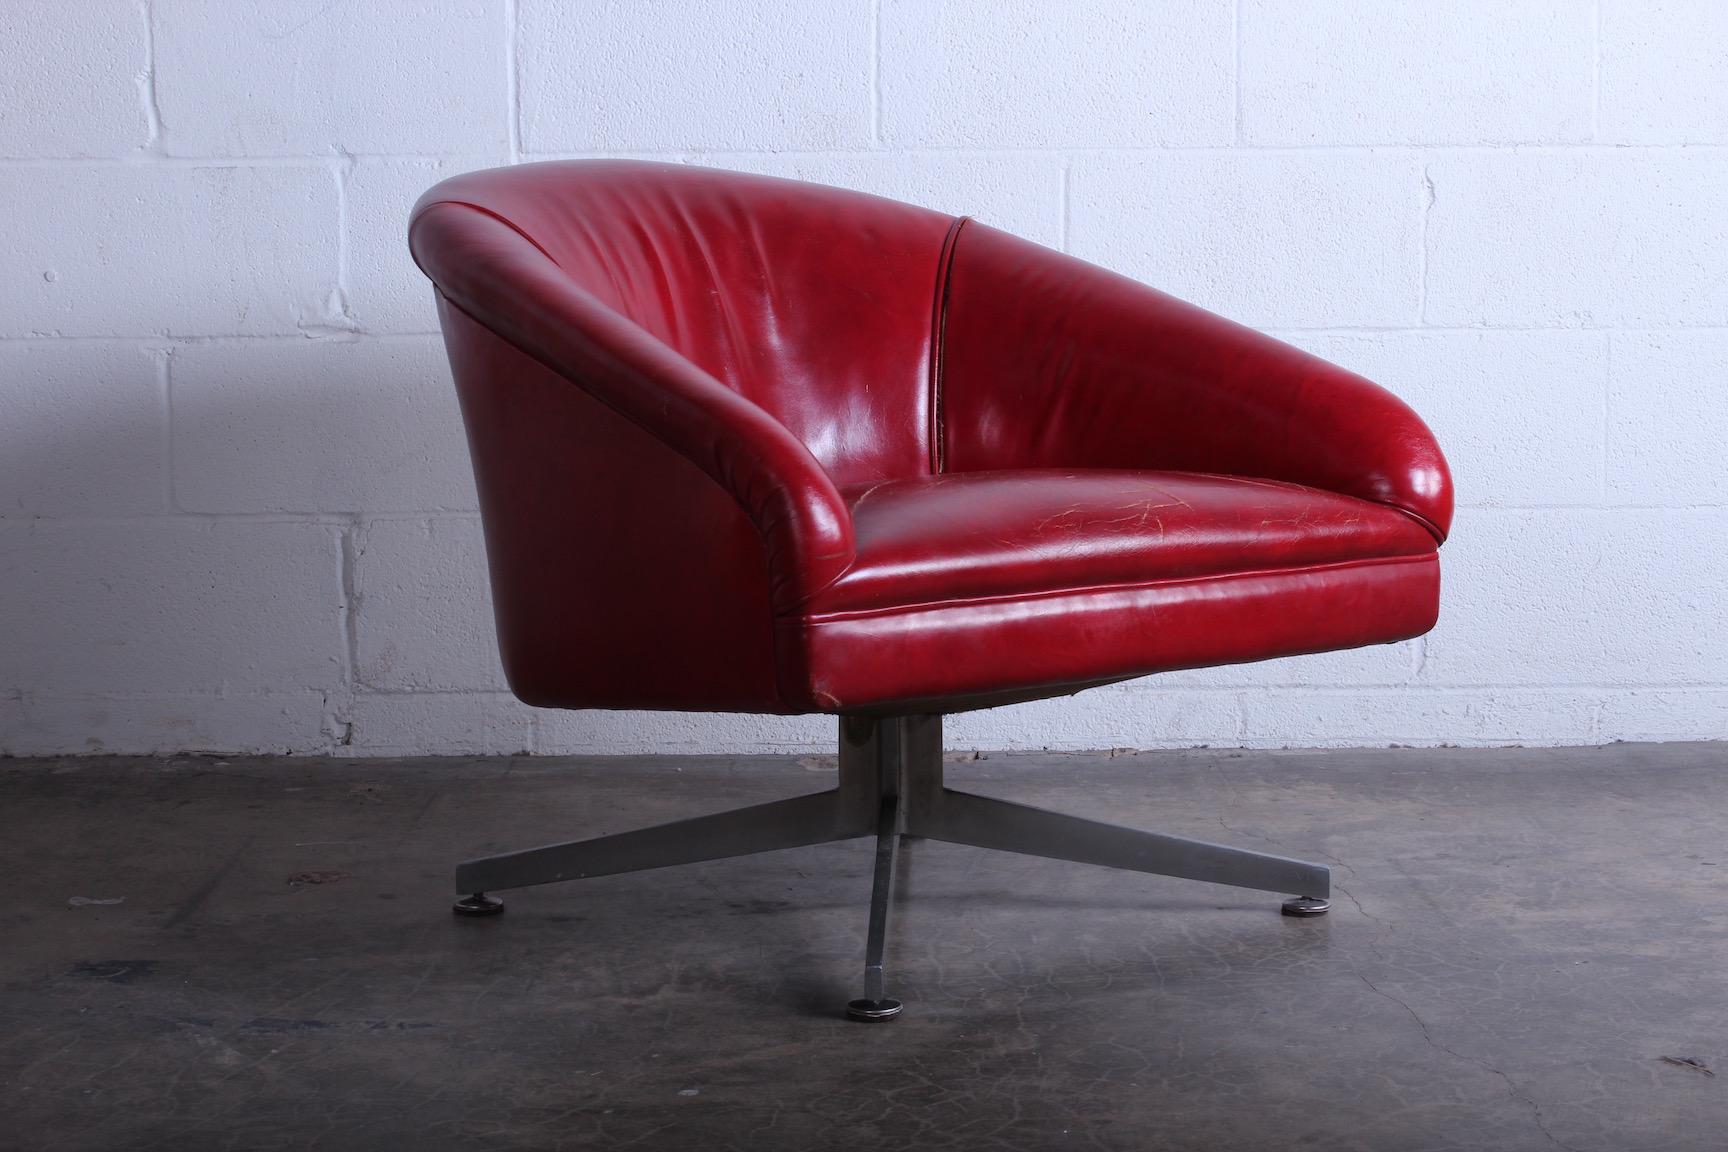 A Classic Ward Bennett lounge chair on aluminum base. The original leather has splits in the seams.